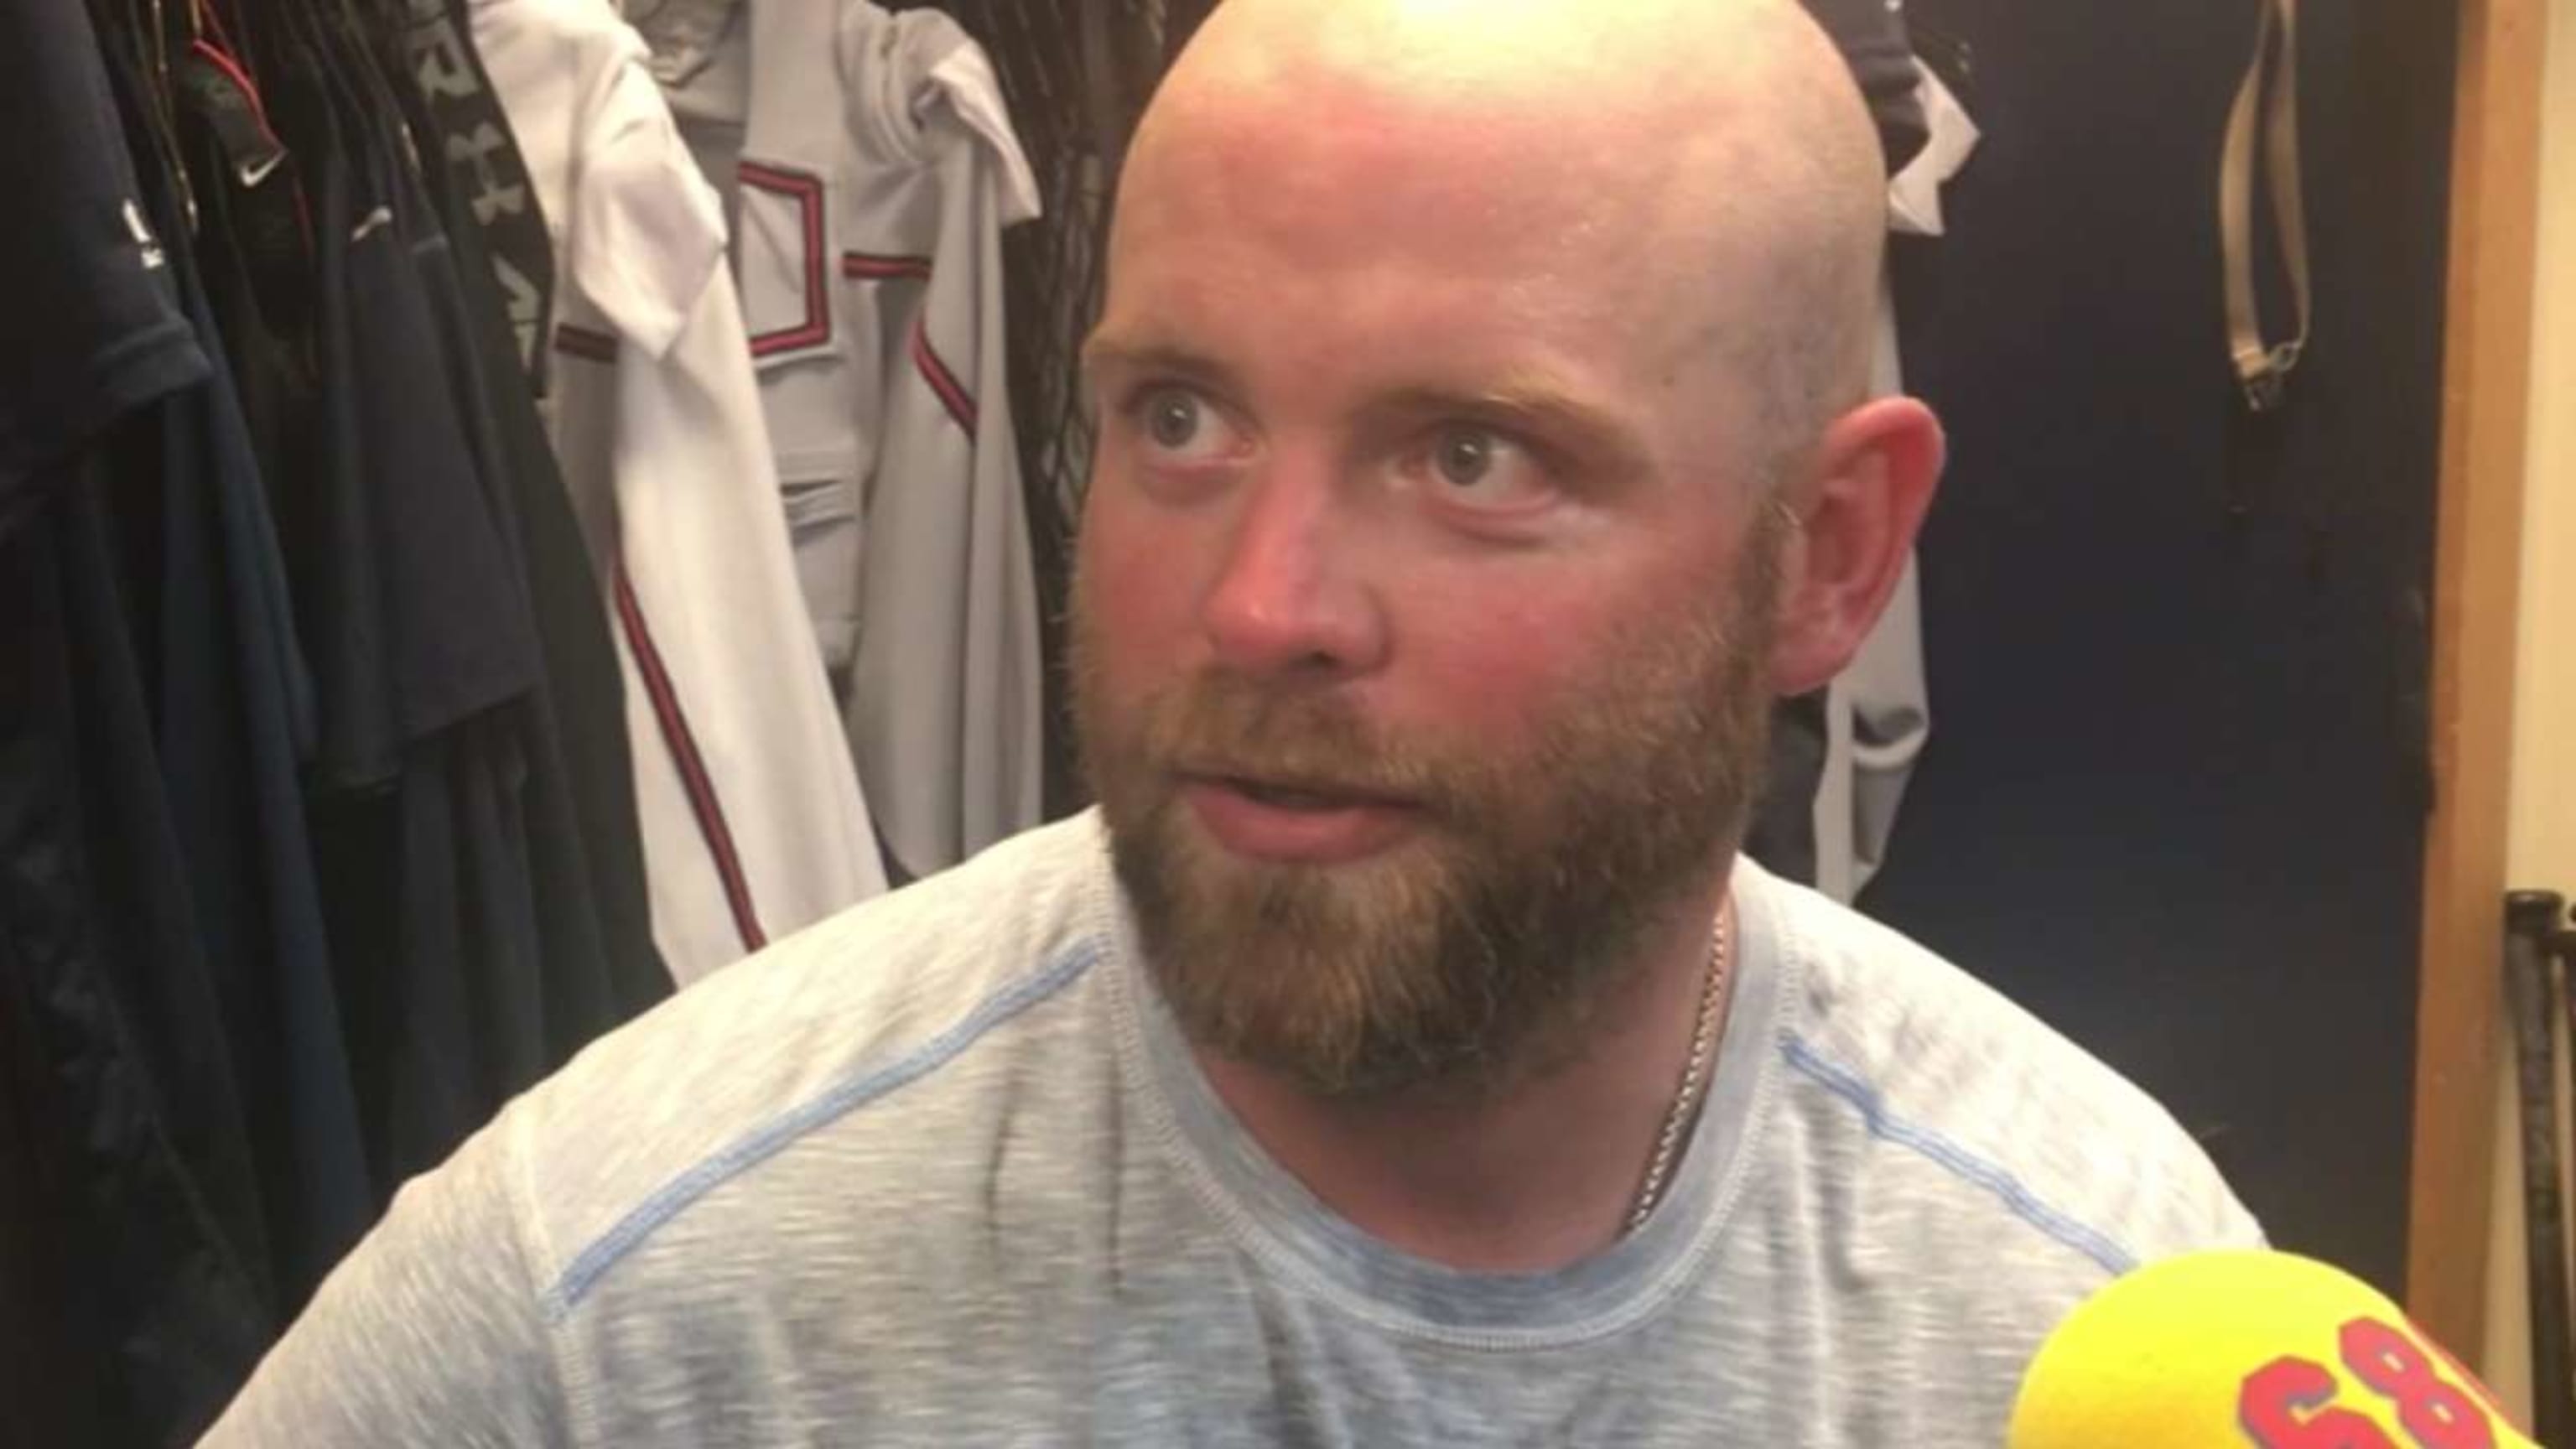 Across the Seams: Is Brian McCann a Hall of Famer?